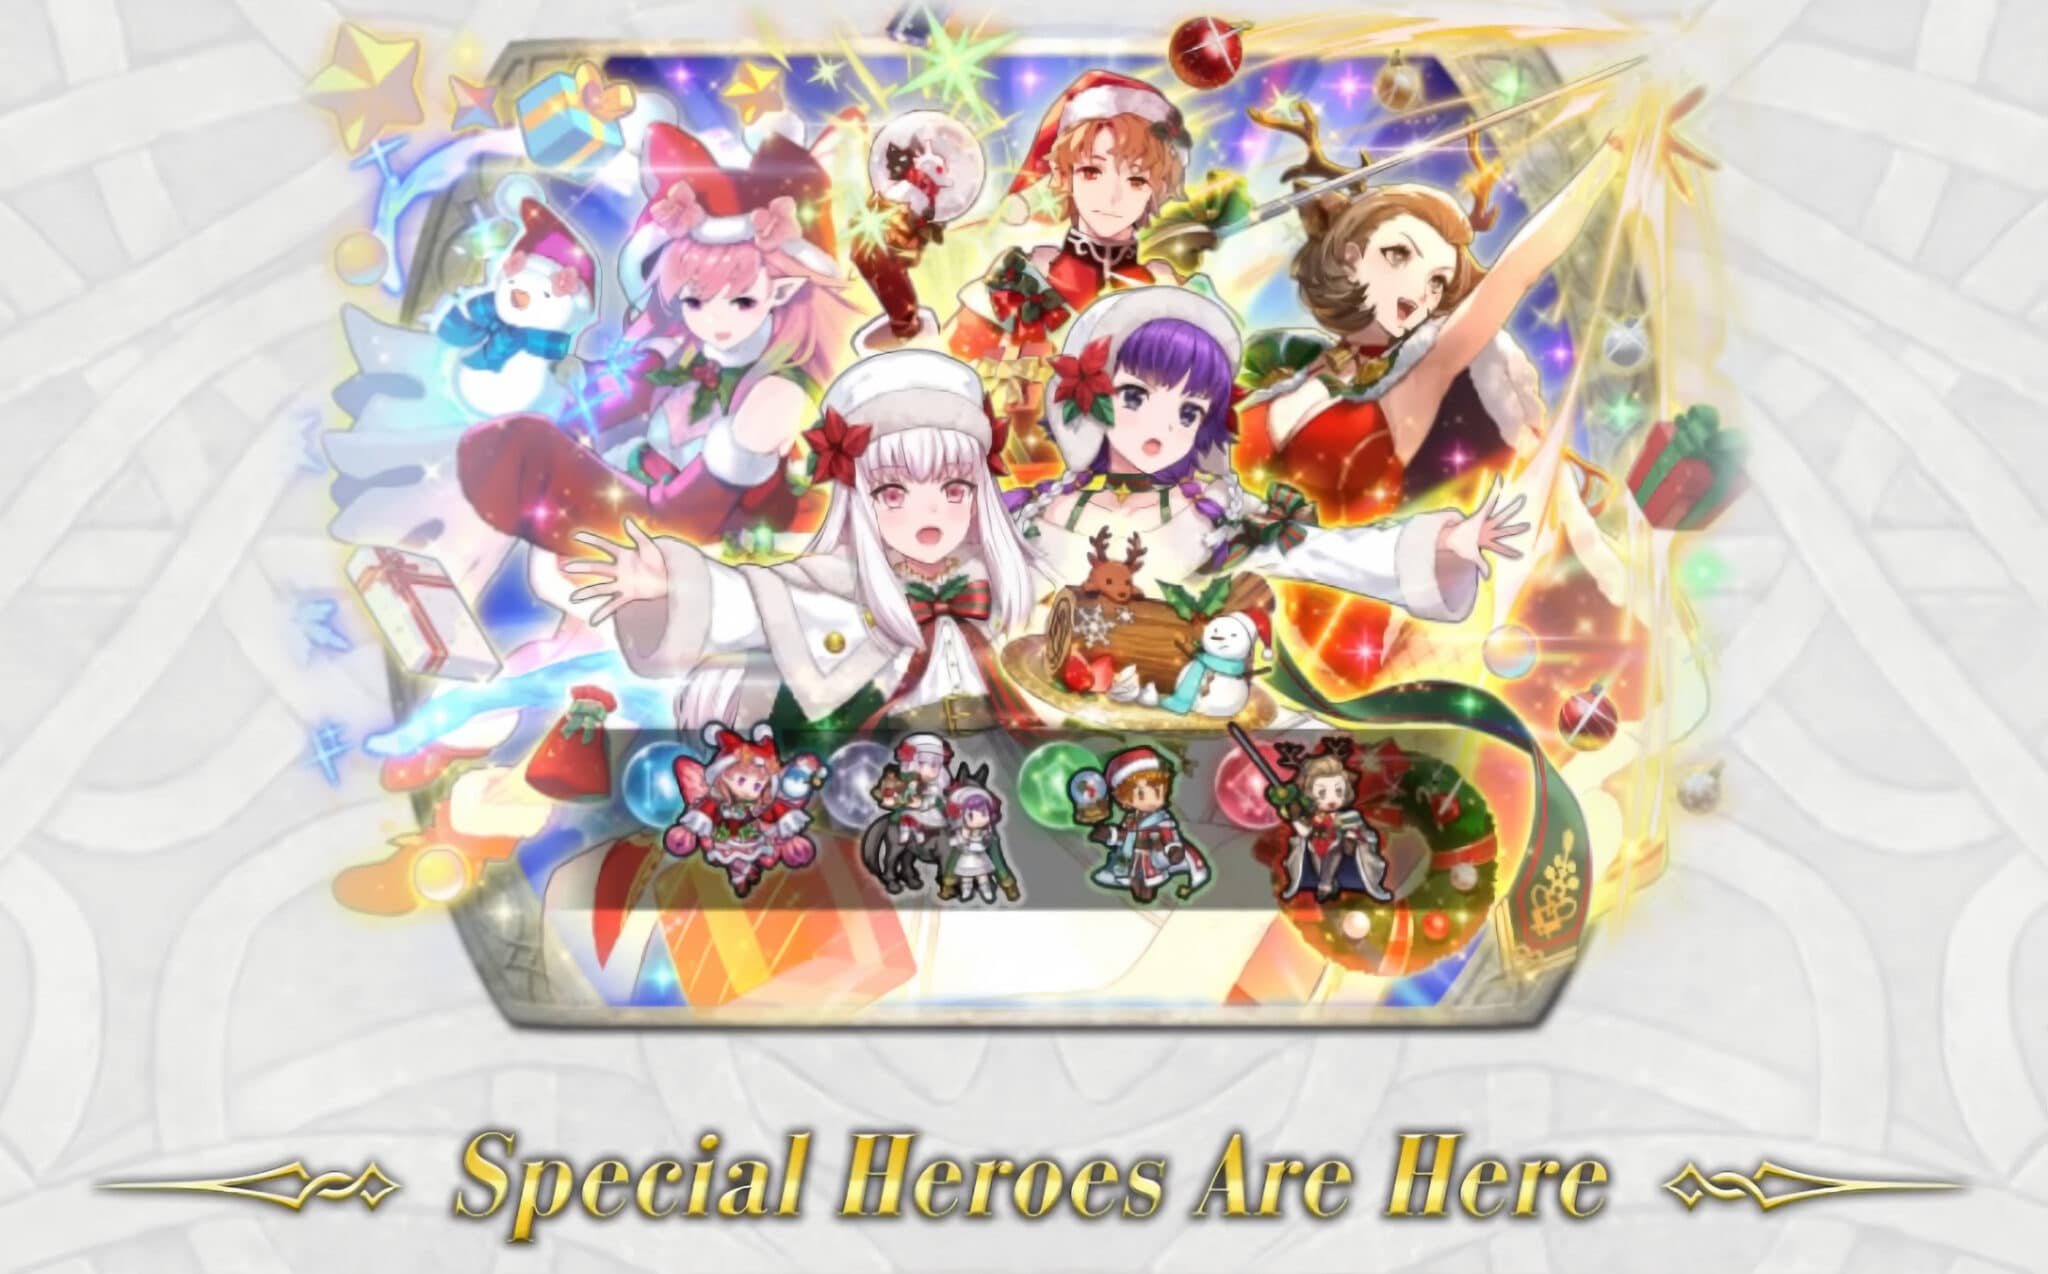 Fire Emblem Heroes – New Special Winter Dreamland units coming December 16th